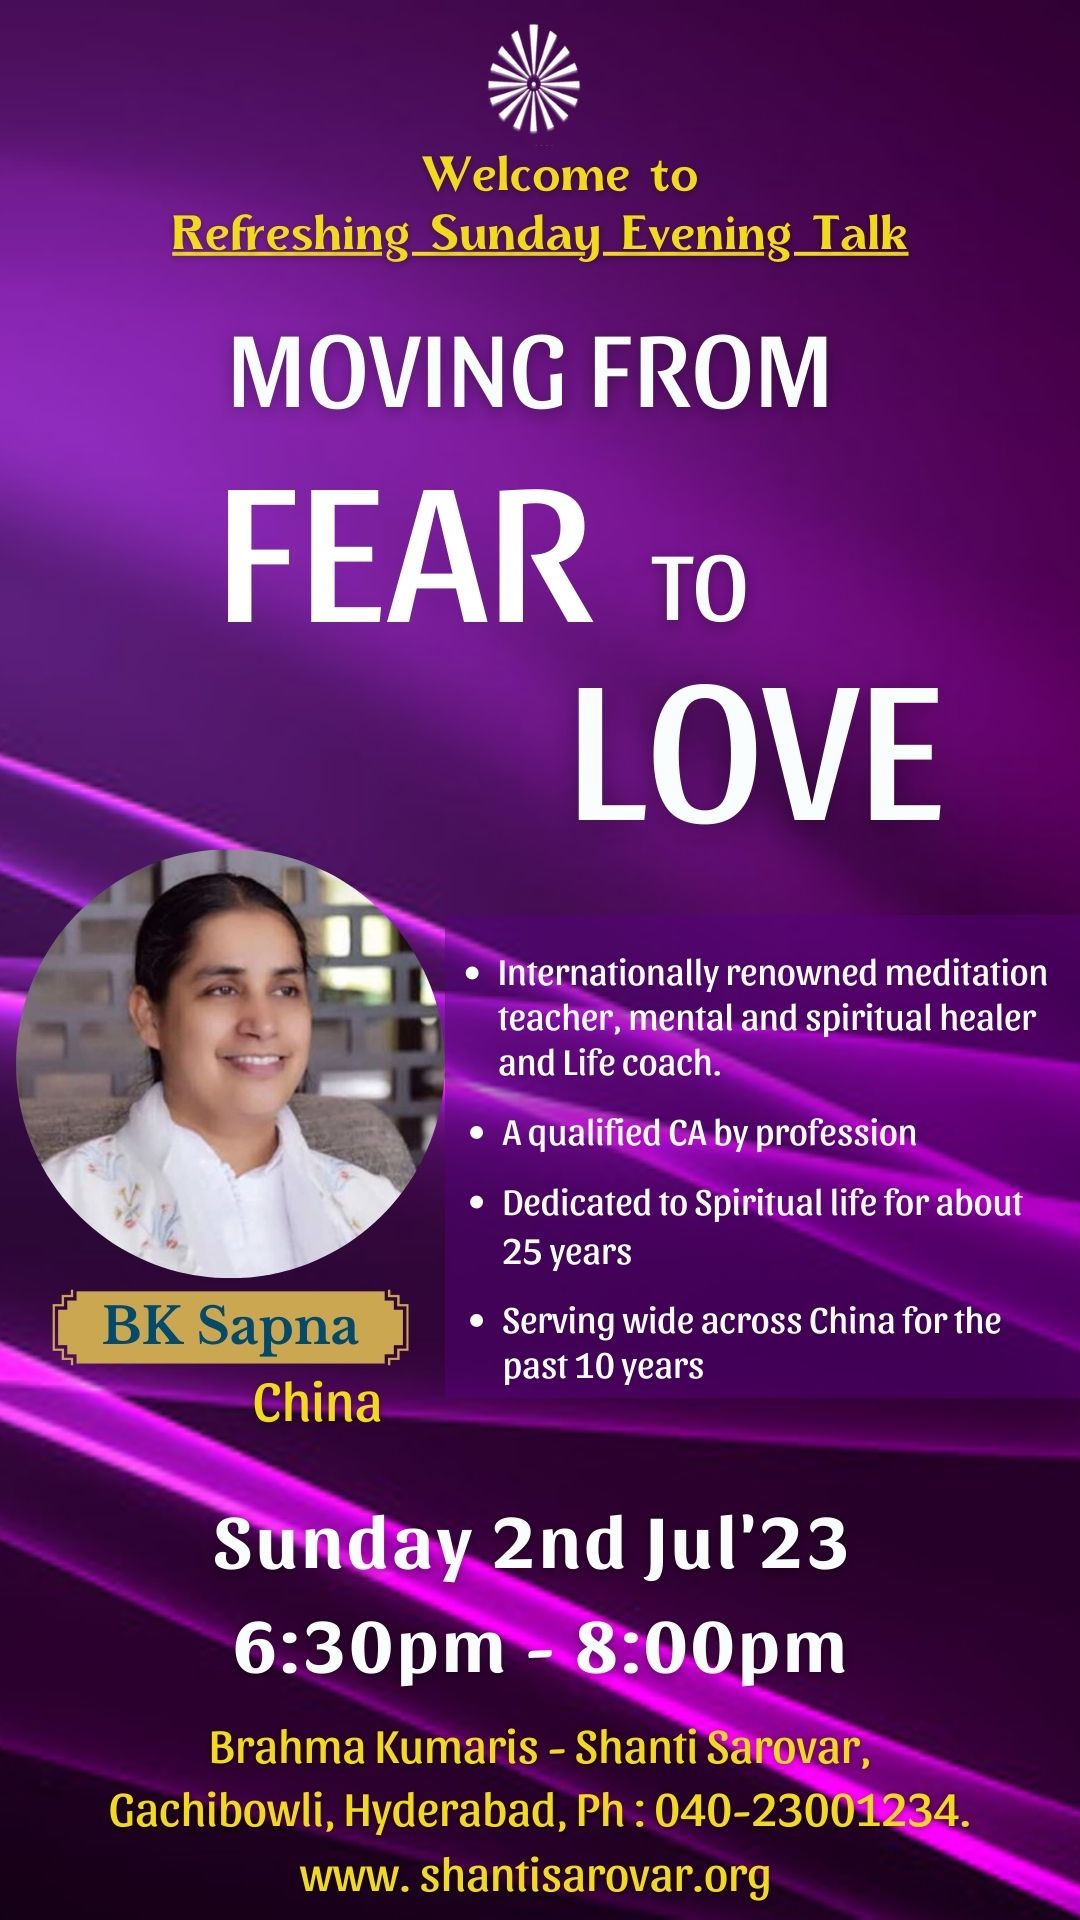 Moving from fear to love